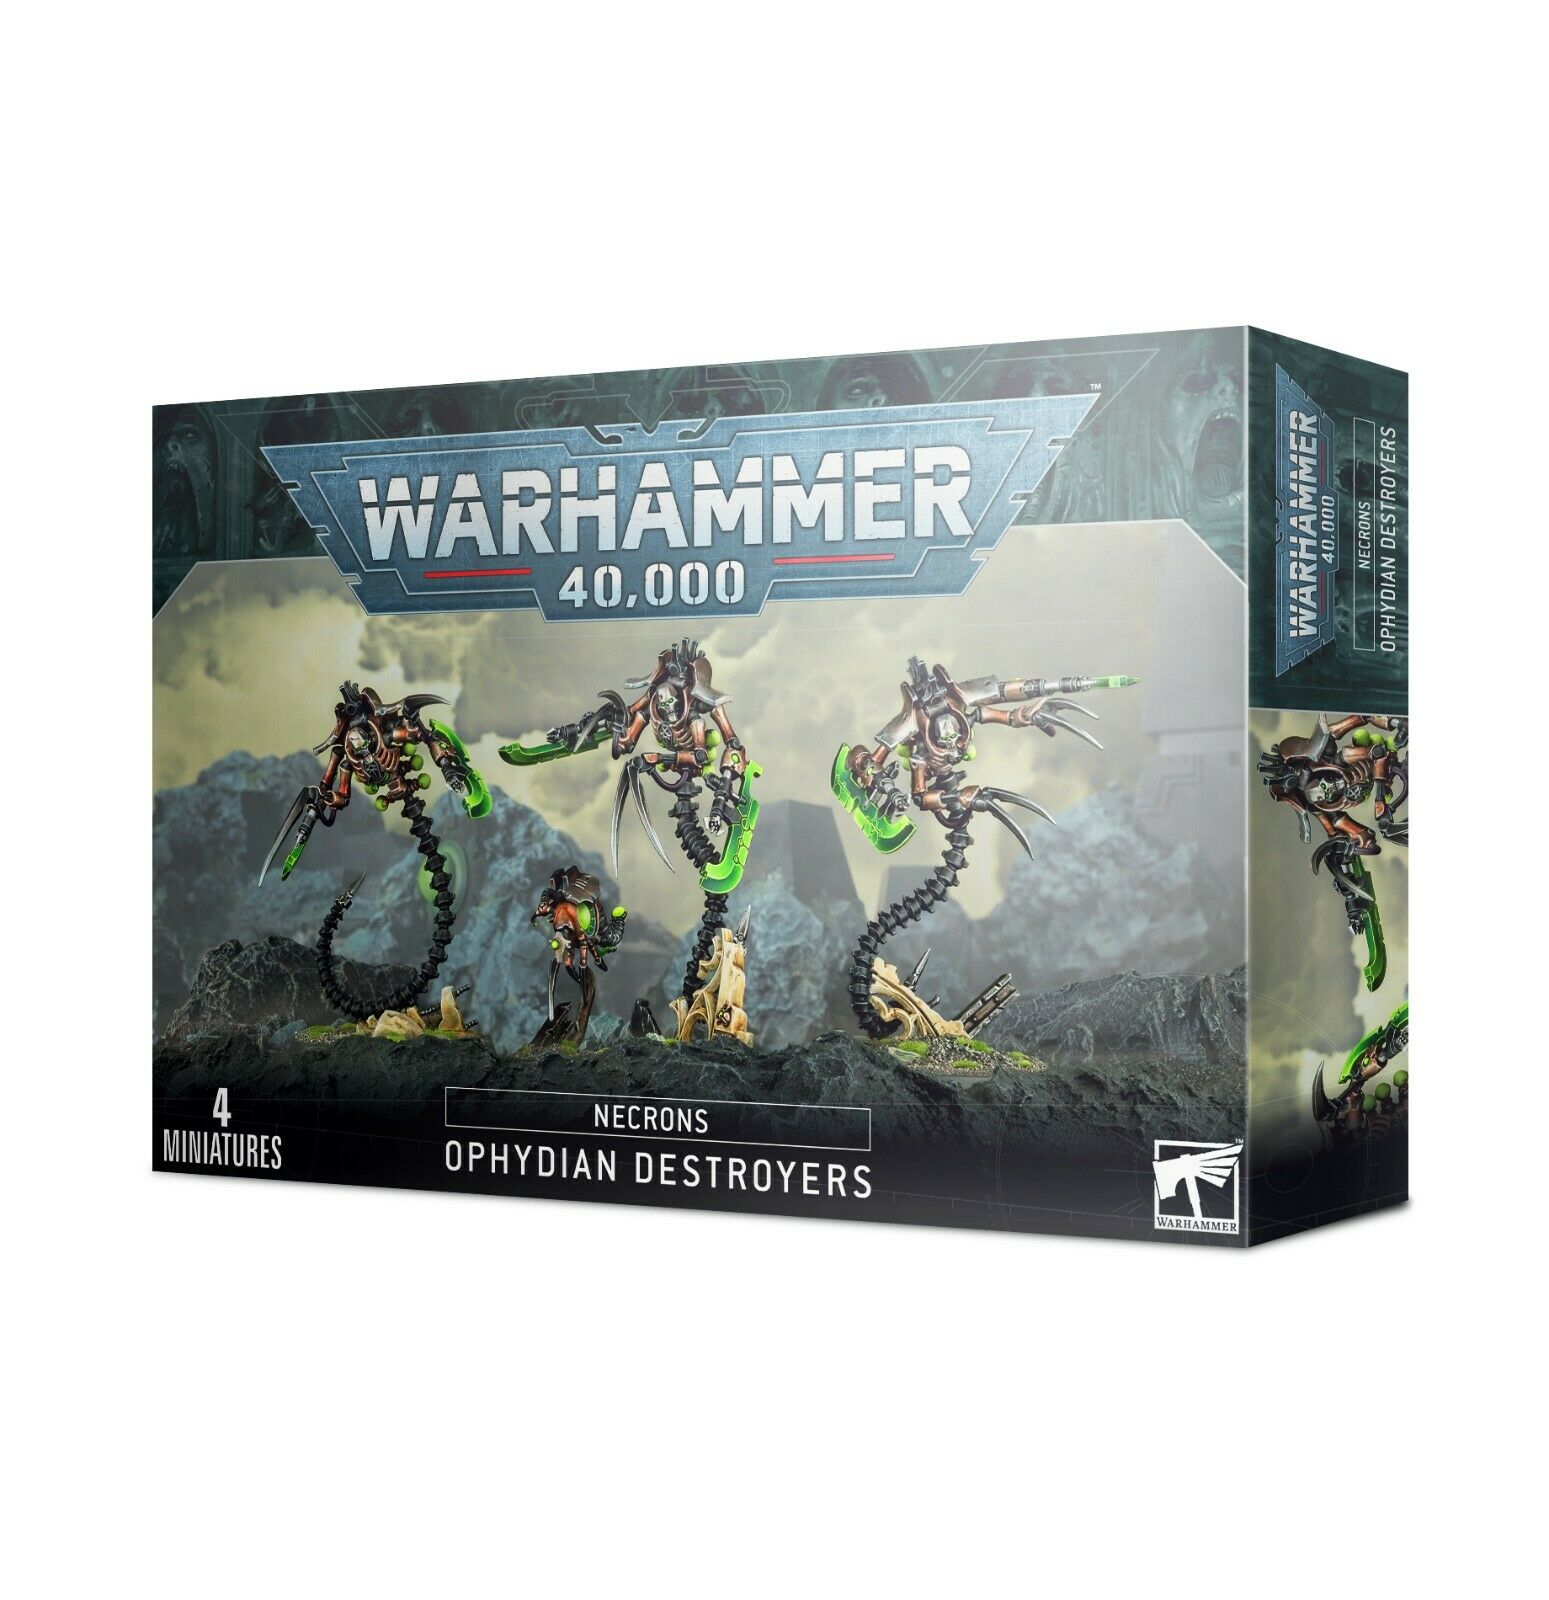 Discount Necrons Ophydian Destroyers - West Coast Games